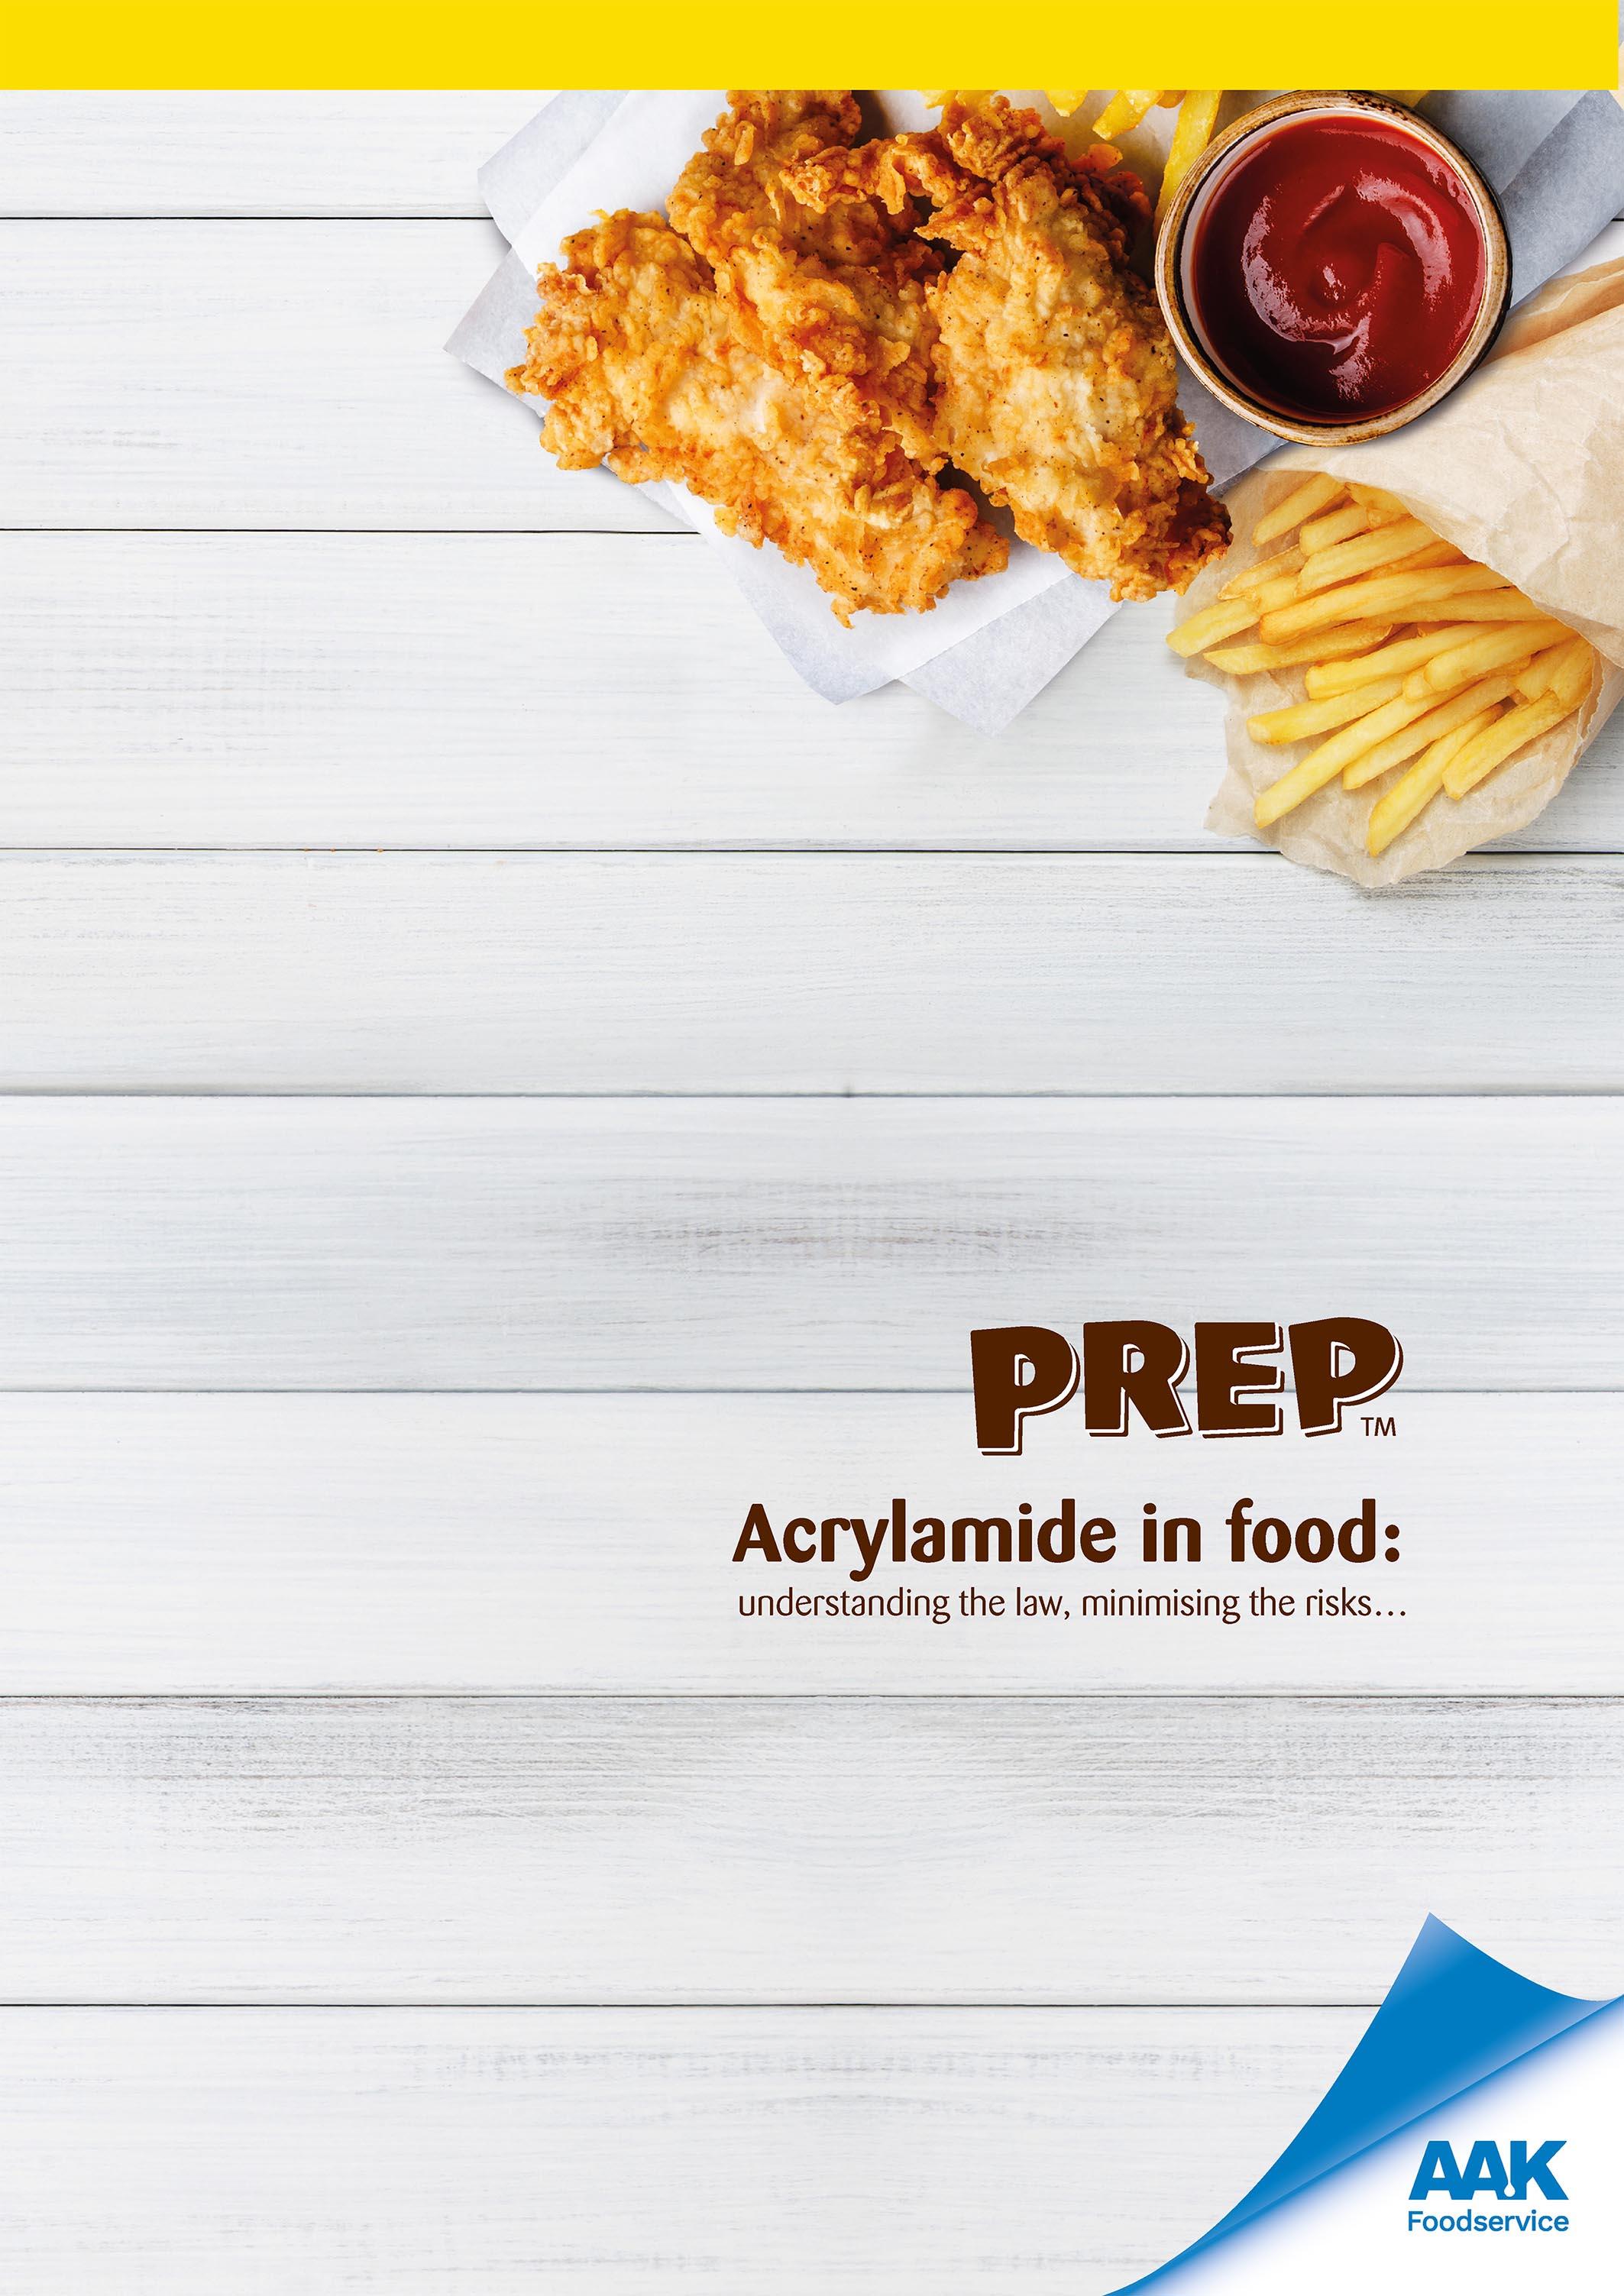 Acrylamide In Food title2